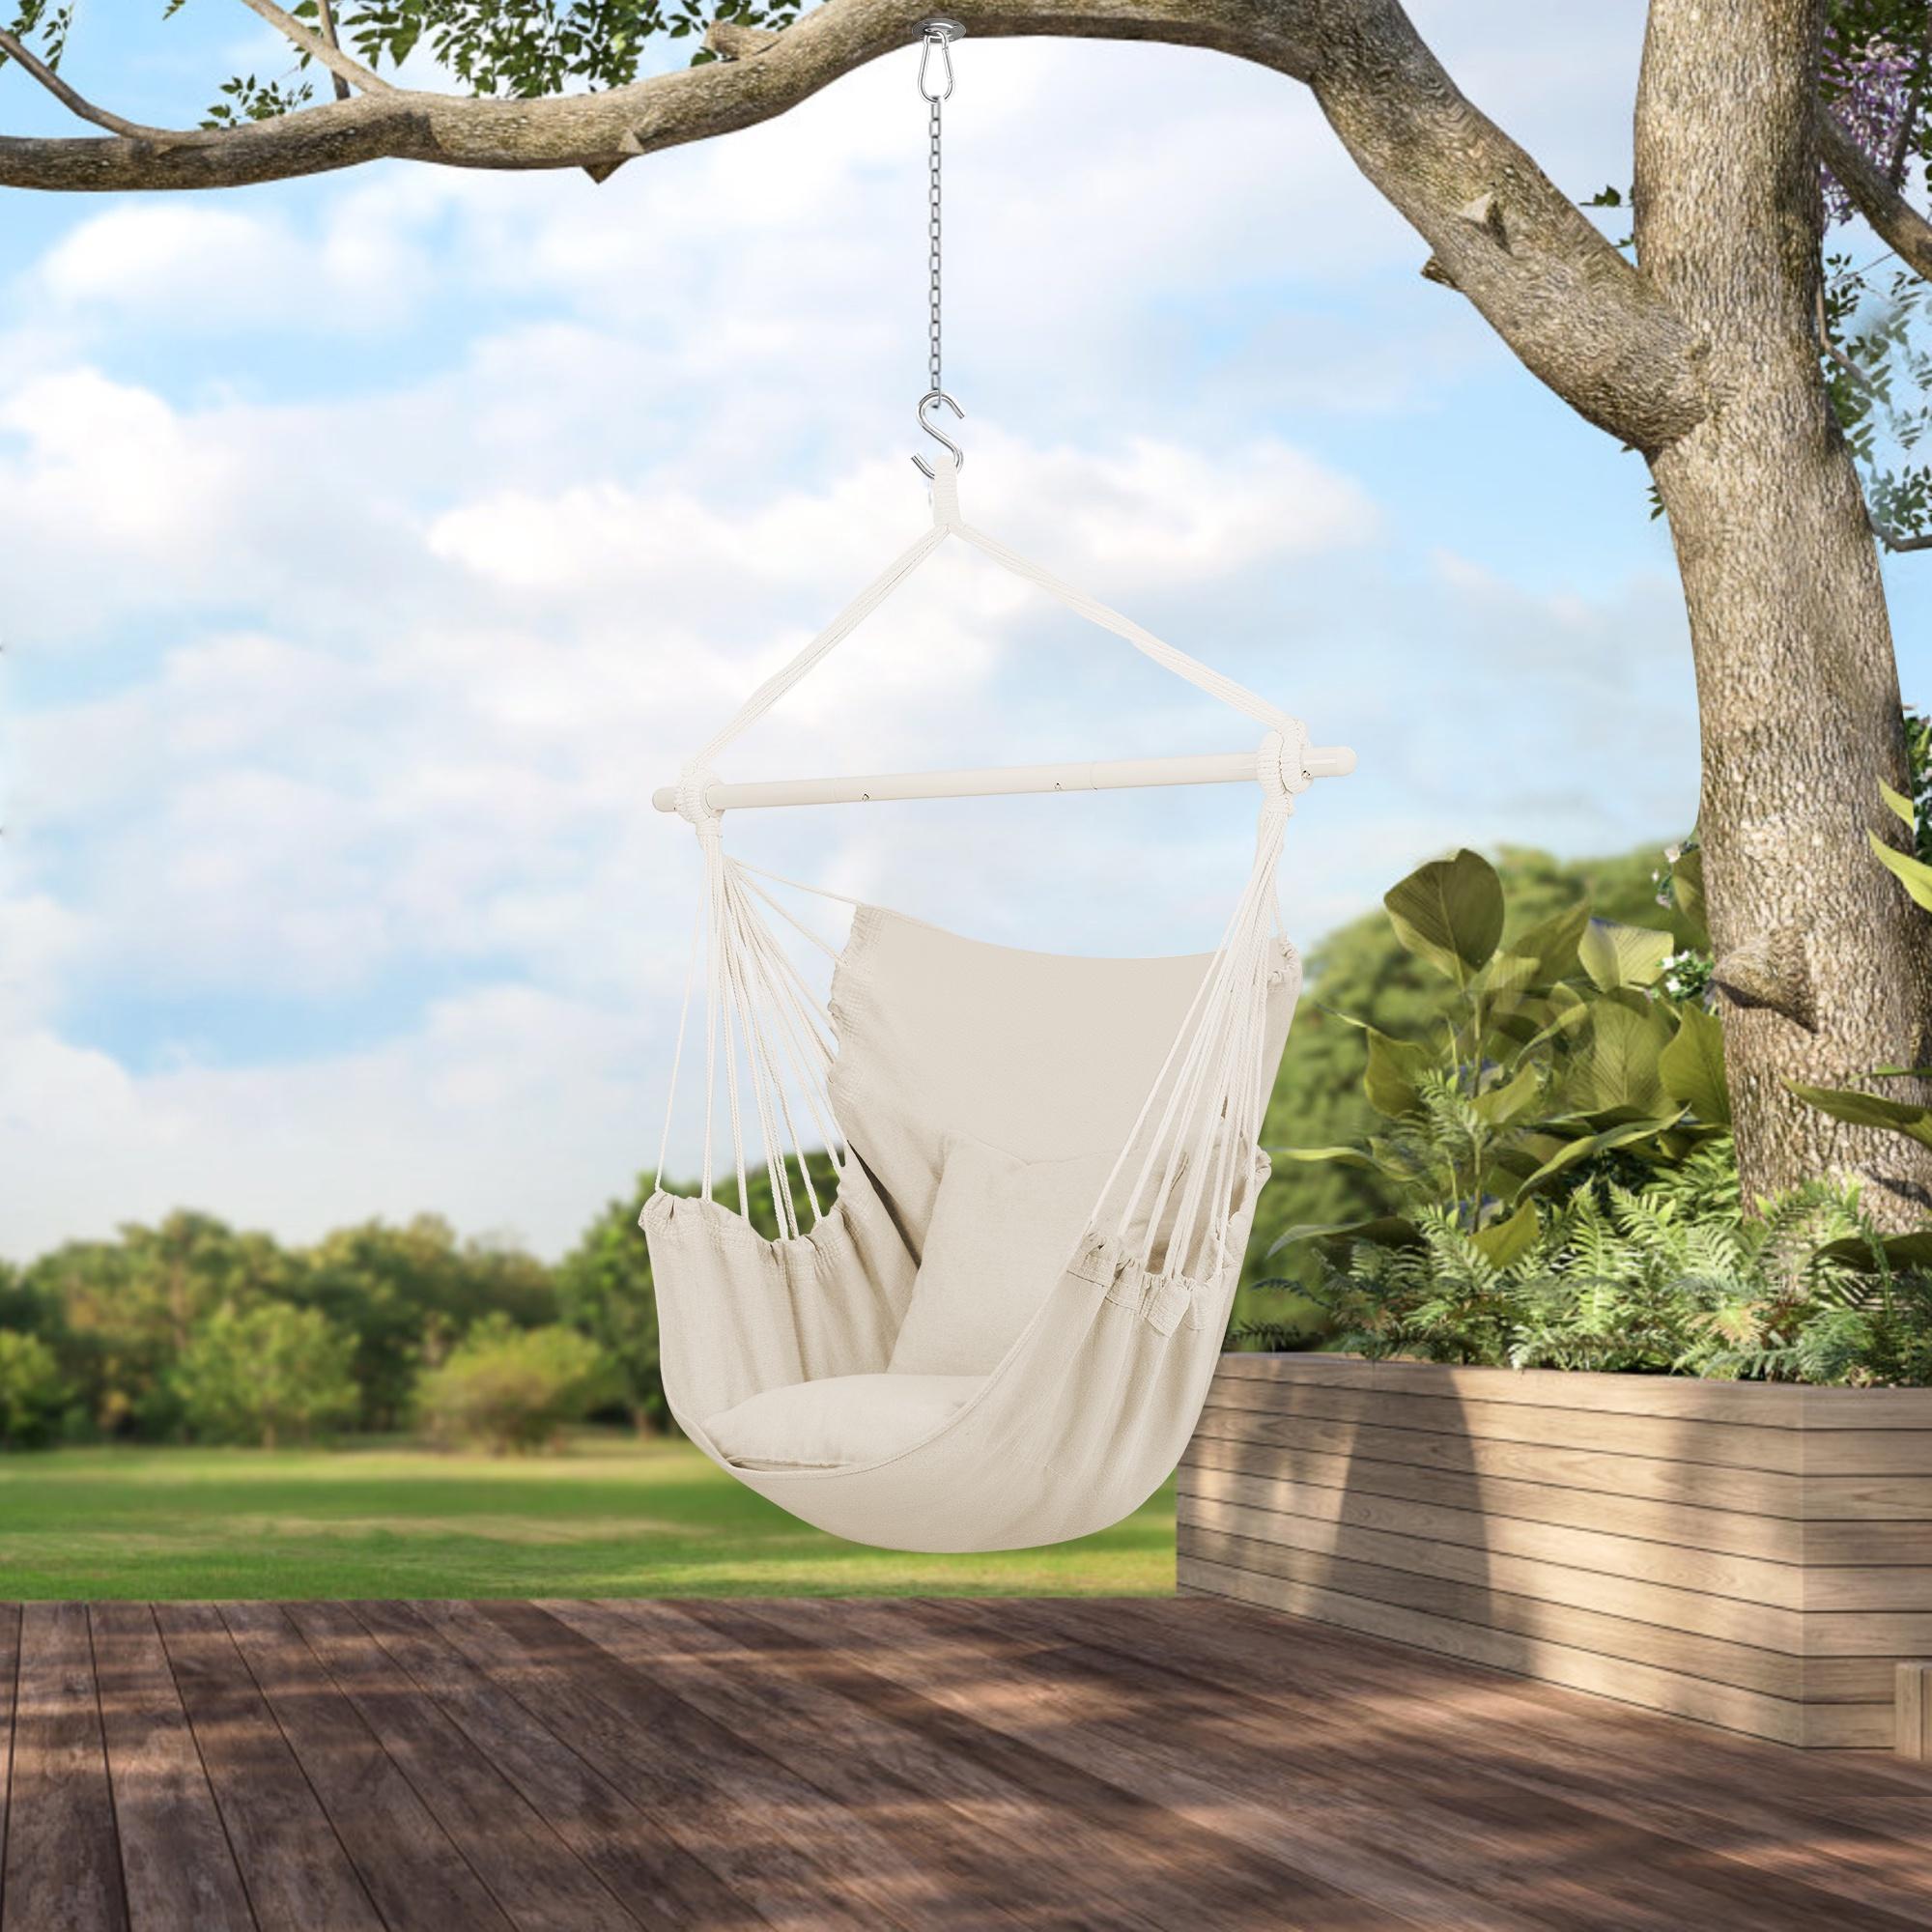 Large Hammock Chair Swing, Relax Hanging Rope Swing Chair with Detachable Metal Support Bar & Two Seat Cushions, Cotton Hammock Chair Swing Seat for Yard Bedroom Patio Porch Indoor Outdoor - image 3 of 9